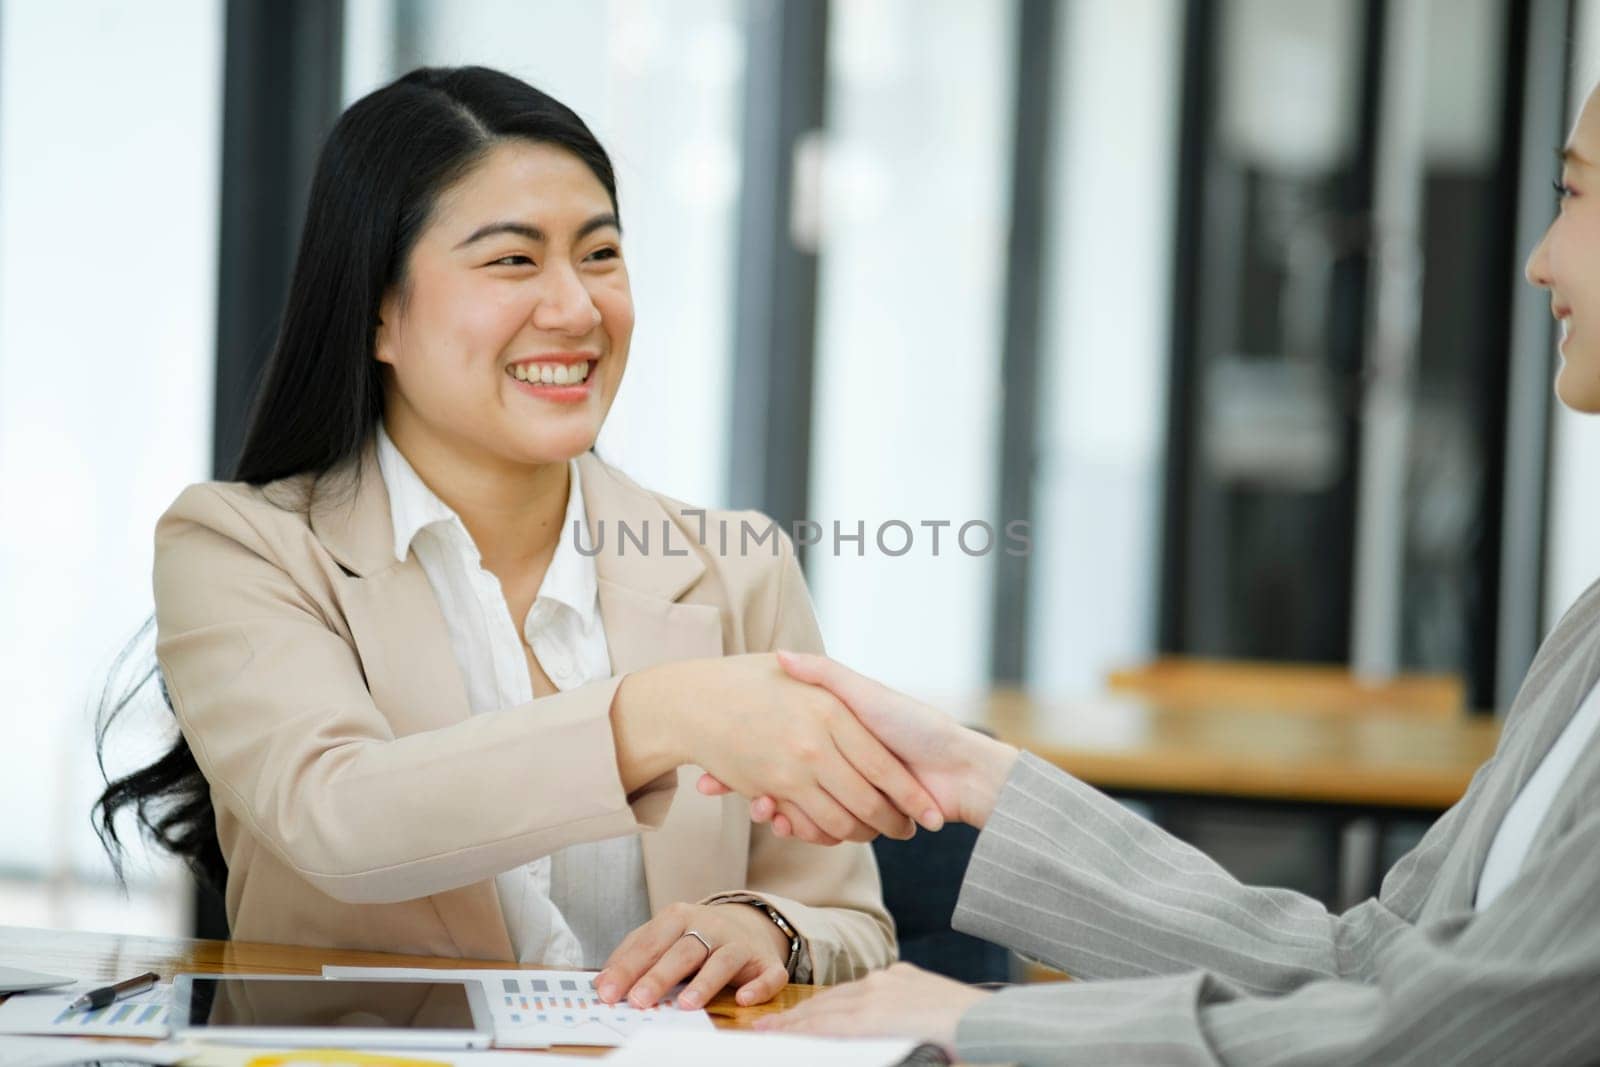 Two smiling businesswomen shaking hands over a desk in the office, symbolizing a successful agreement or partnership.